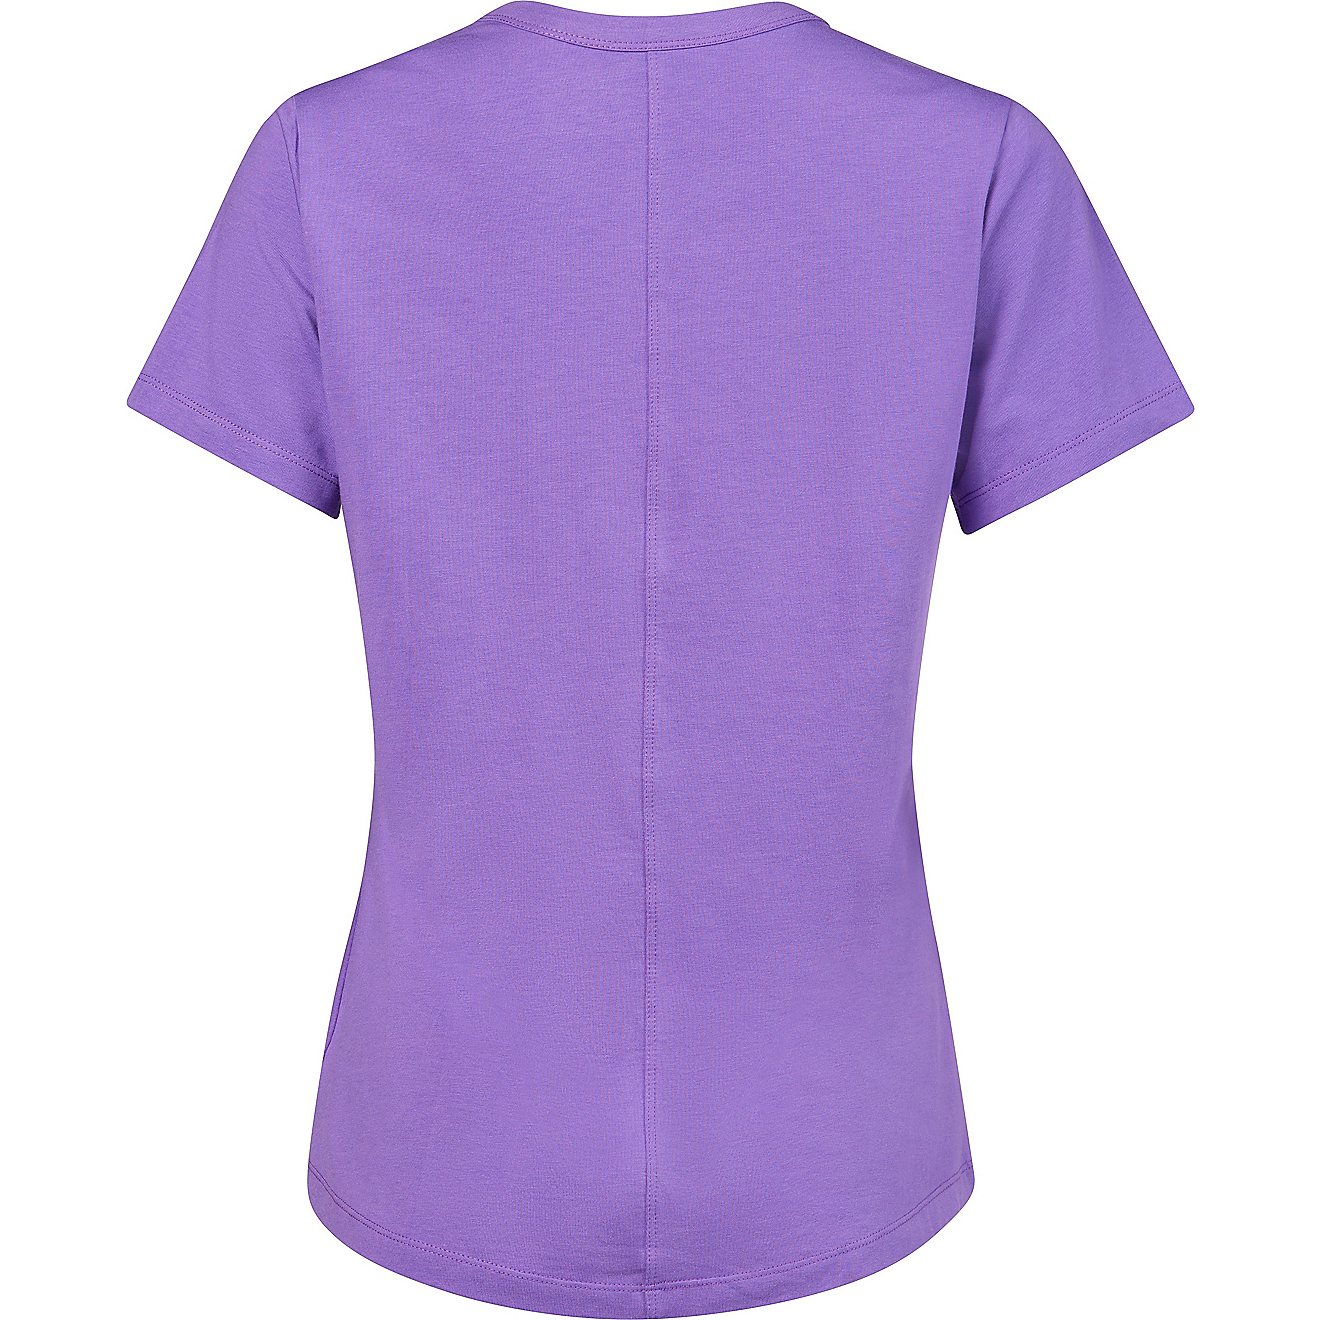 BCG Women's Sign Relaxed Crew Jersey T-shirt                                                                                     - view number 2